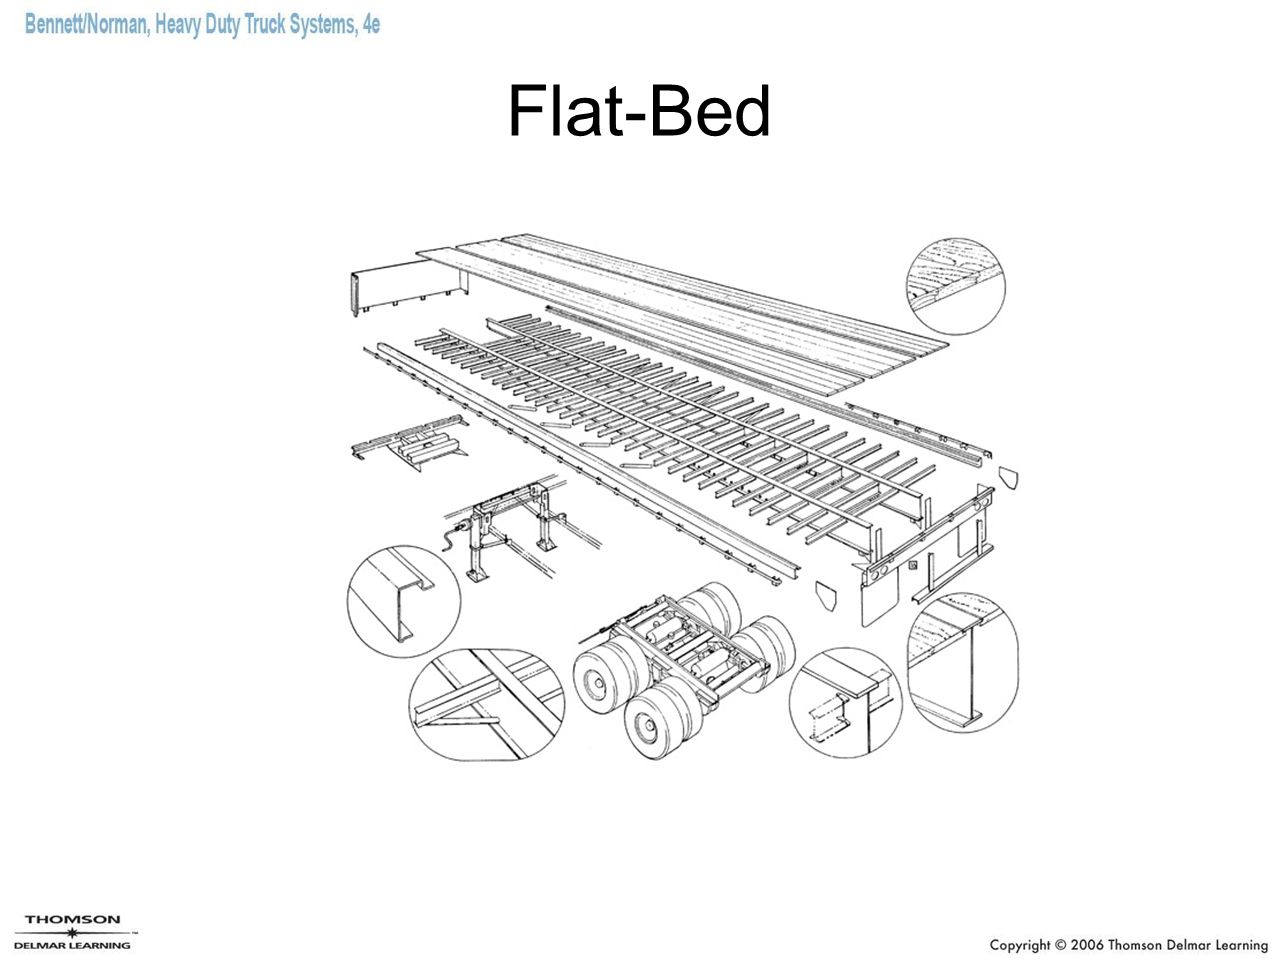 Flat-Bed